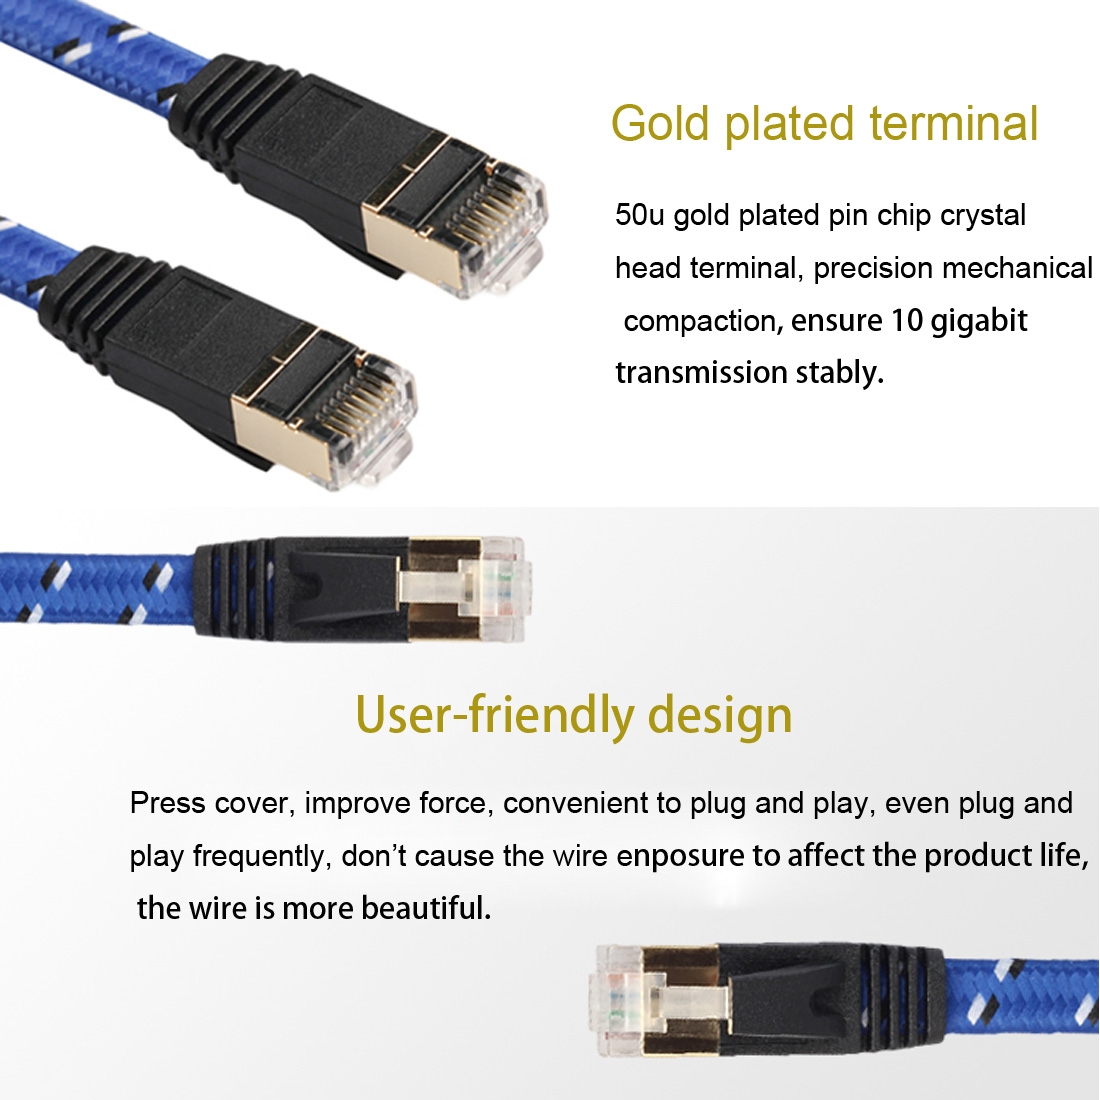 15m Gold Plated CAT-7 10 Gigabit Ethernet Ultra Flat Patch Cable for Modem Router LAN Network, Built with Shielded RJ45 Connector